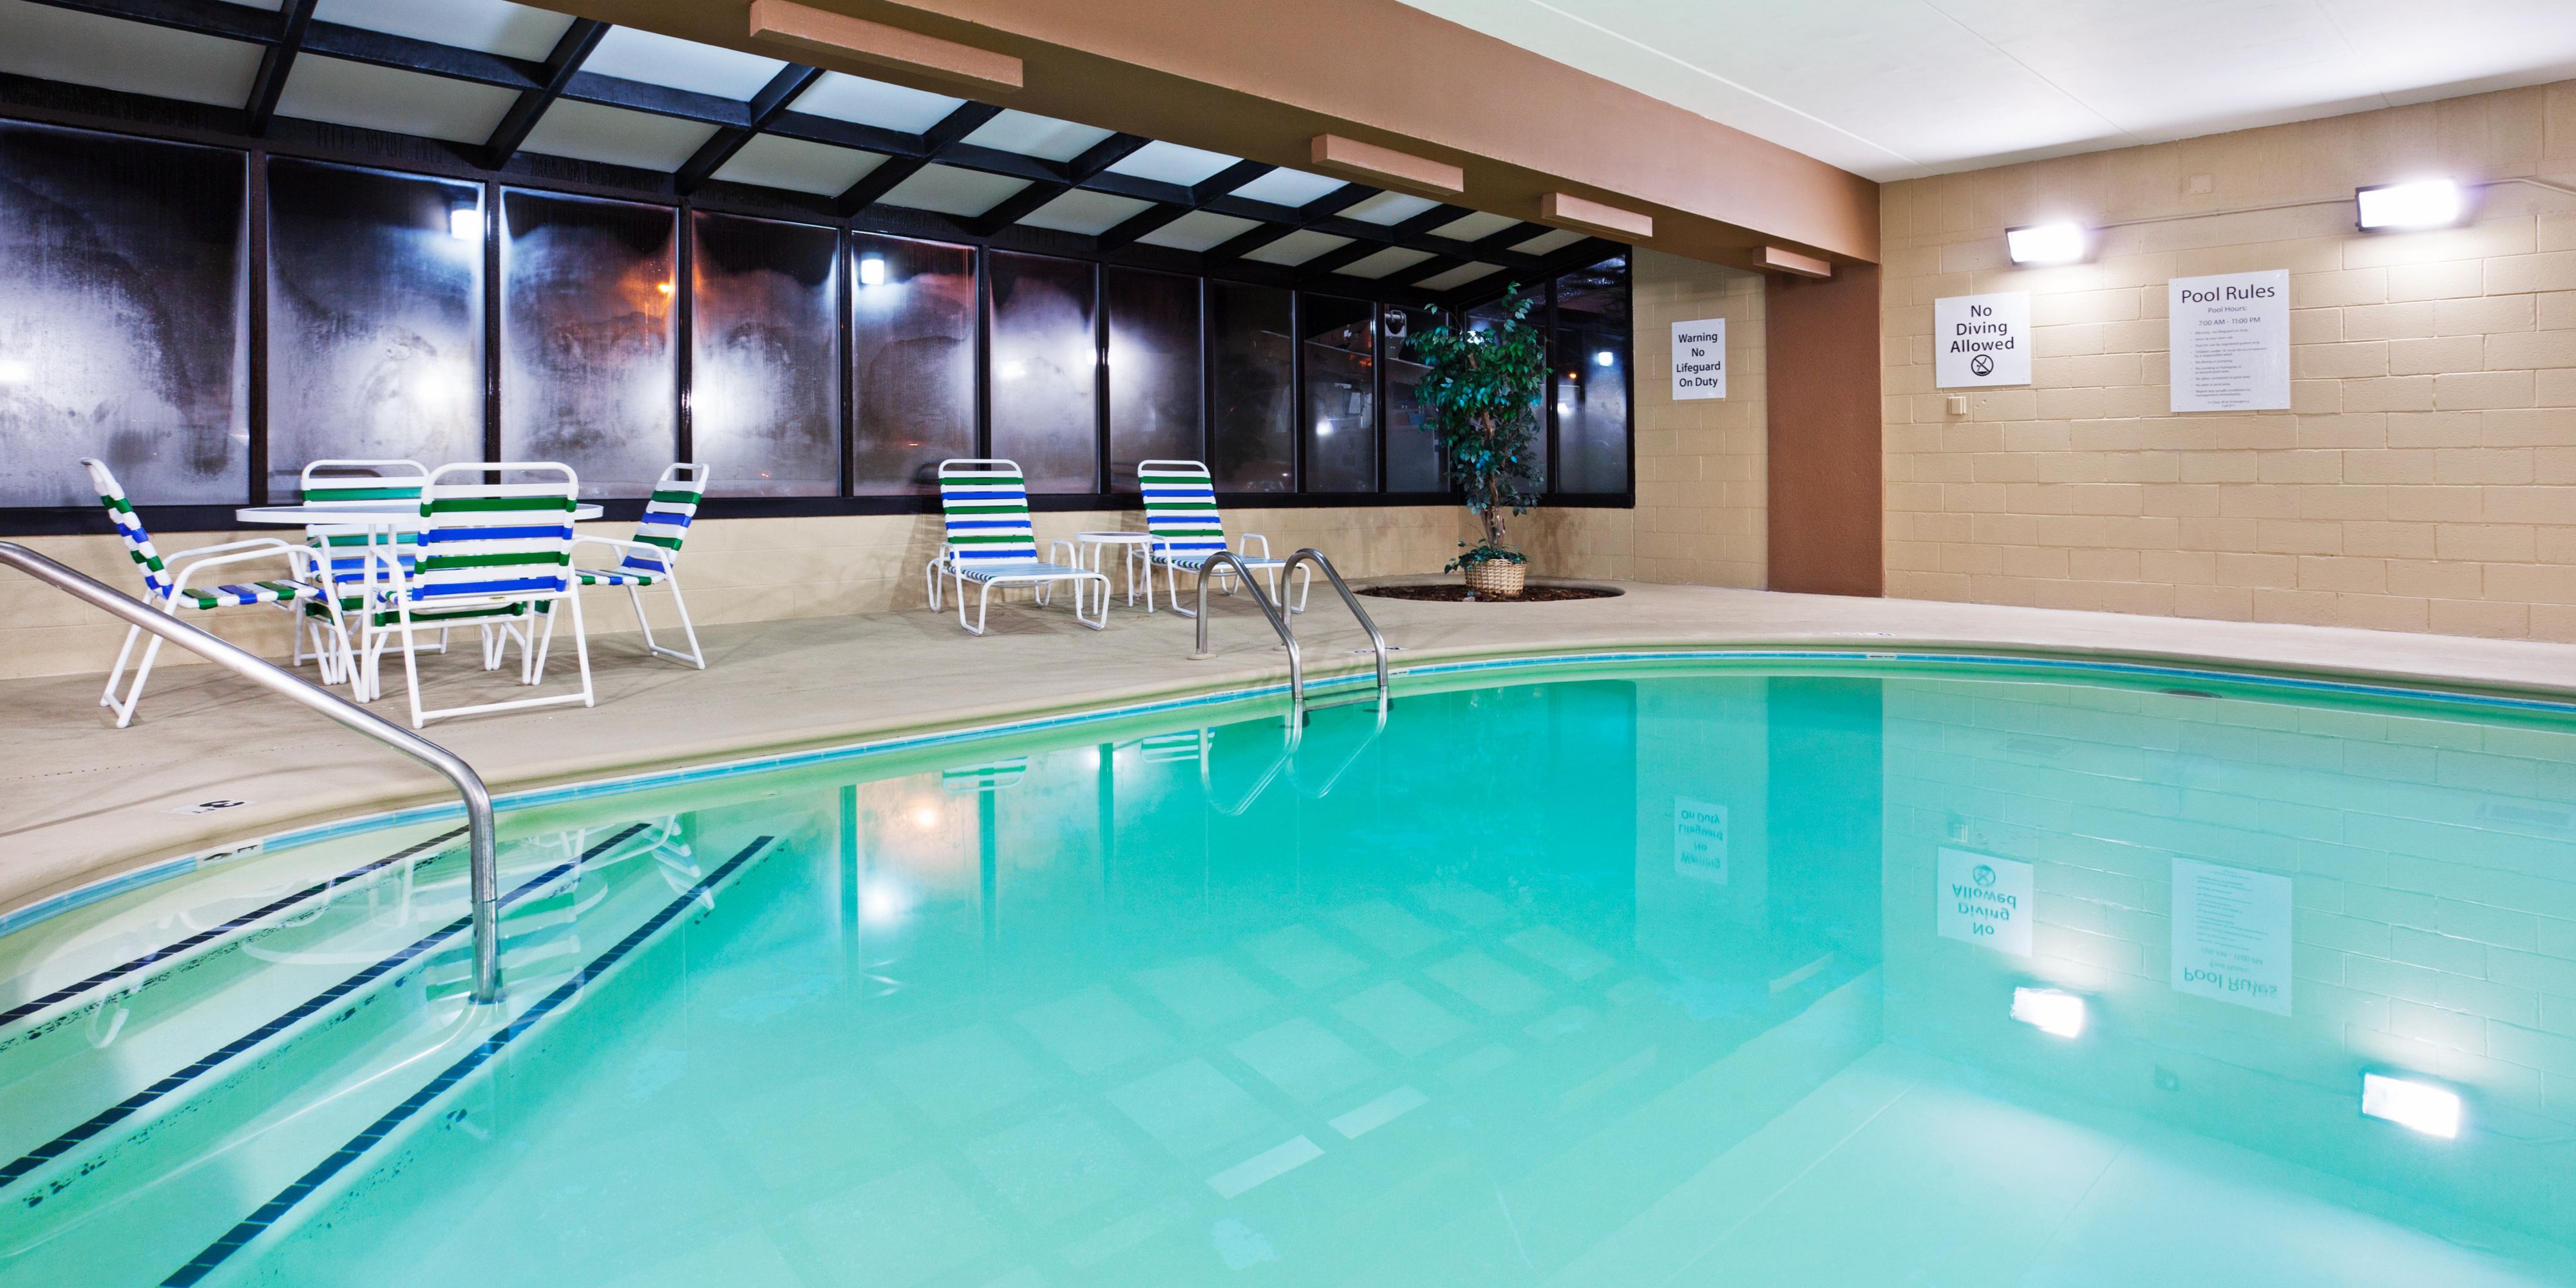 After a long day, unwind in our indoor pool or relax after a great work-out. Escape the cooler weather and enjoy Summer all year long!